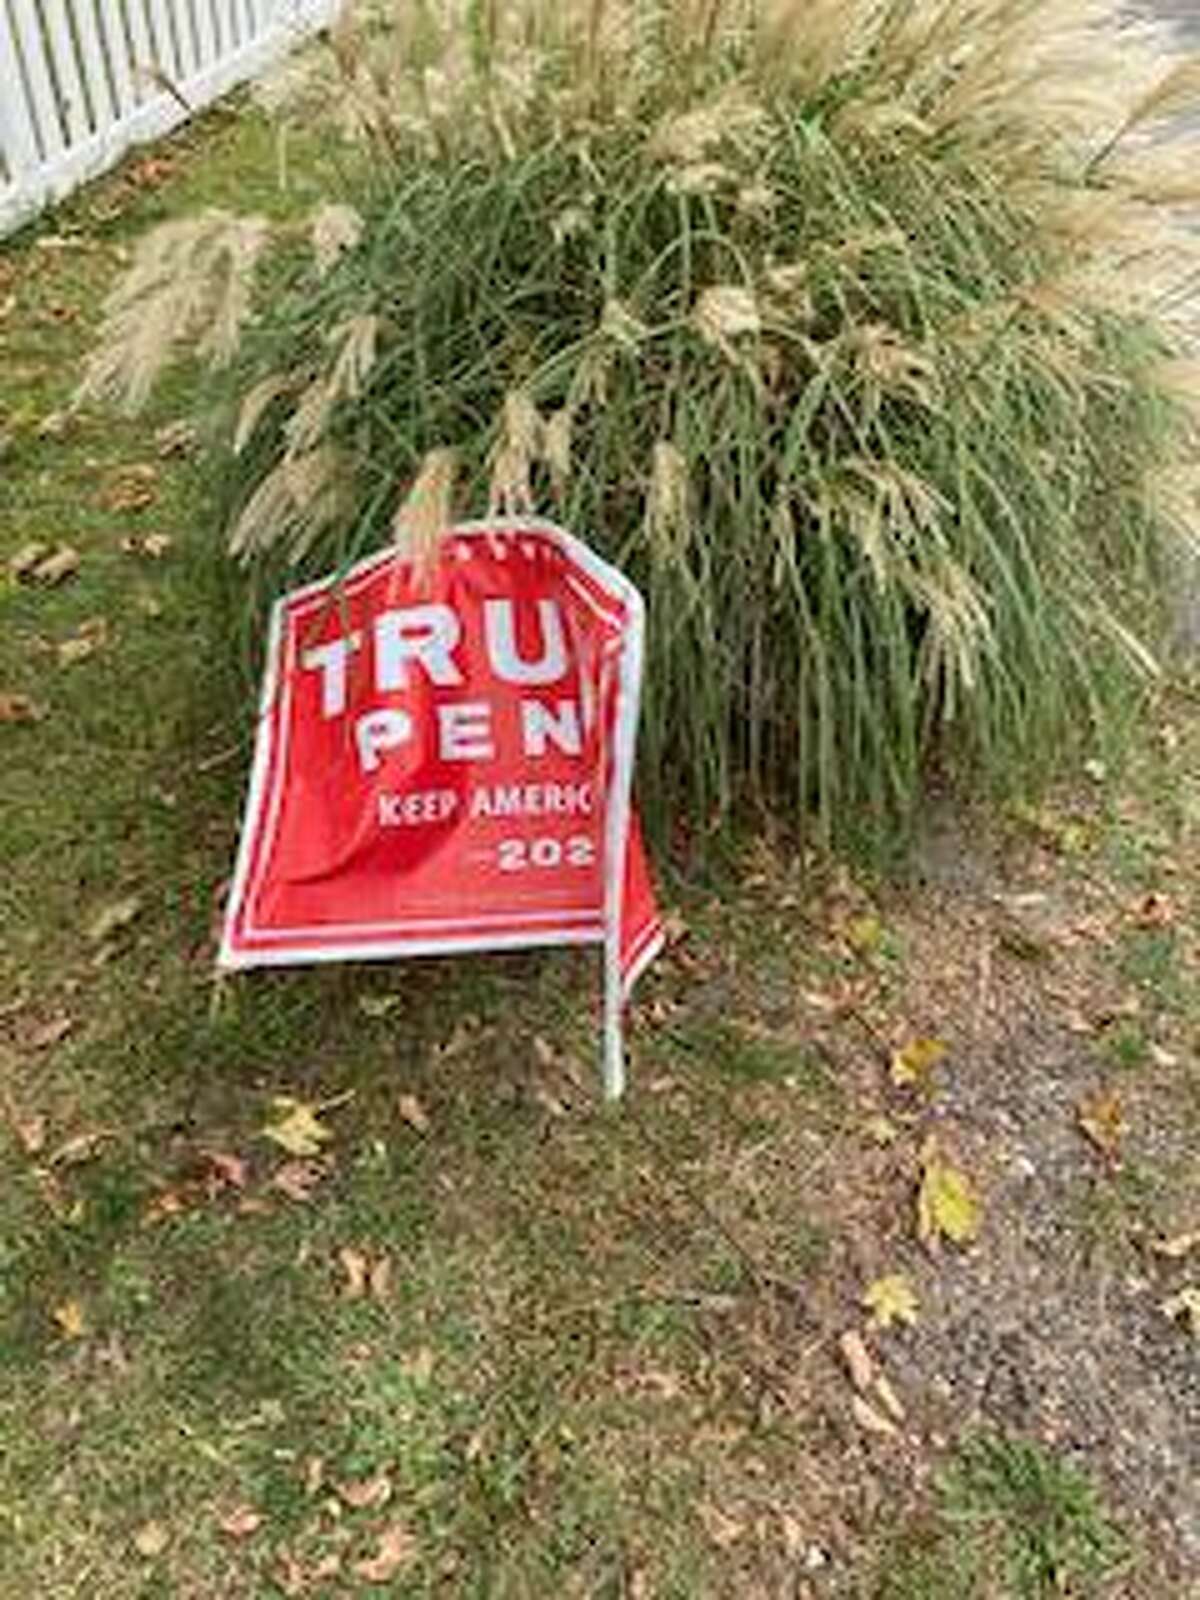 A sign belong to F.X. Flaherty, a Post Road resident, showing support for President Donald Trump was destroyed outside his home, he said.